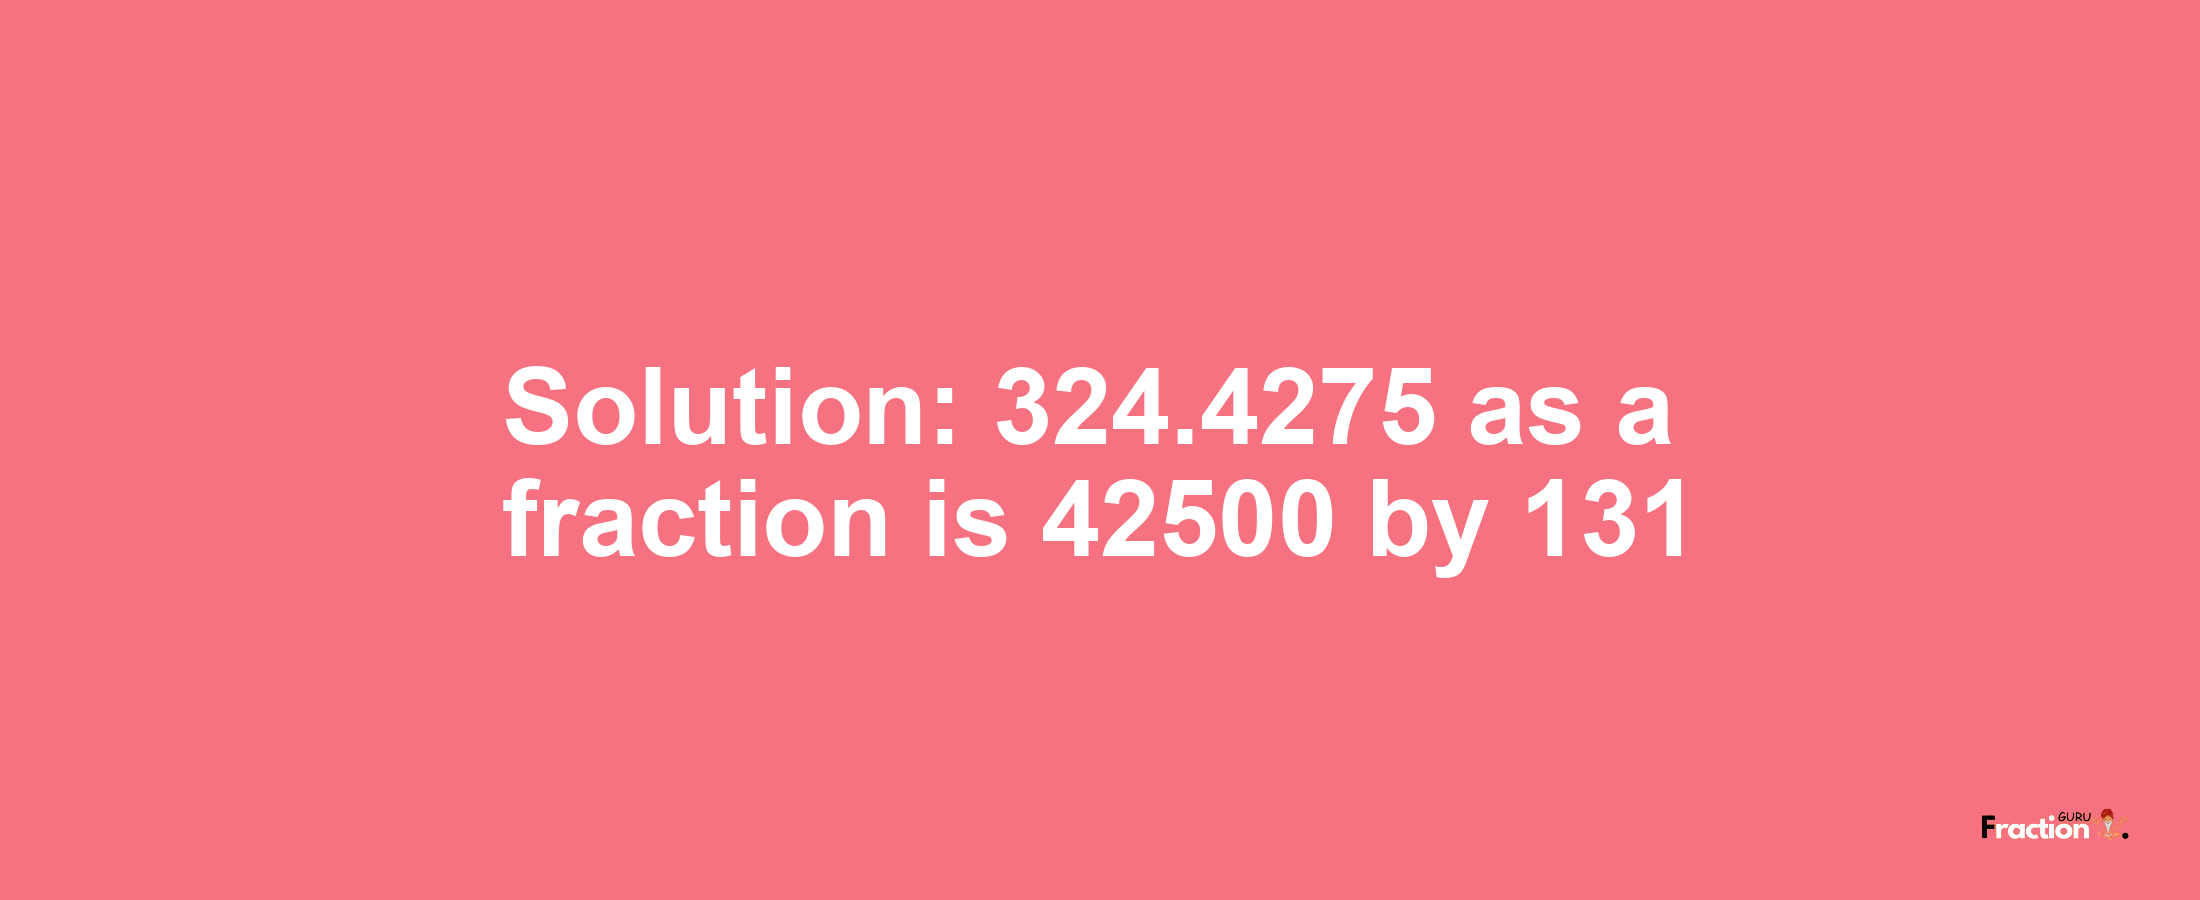 Solution:324.4275 as a fraction is 42500/131